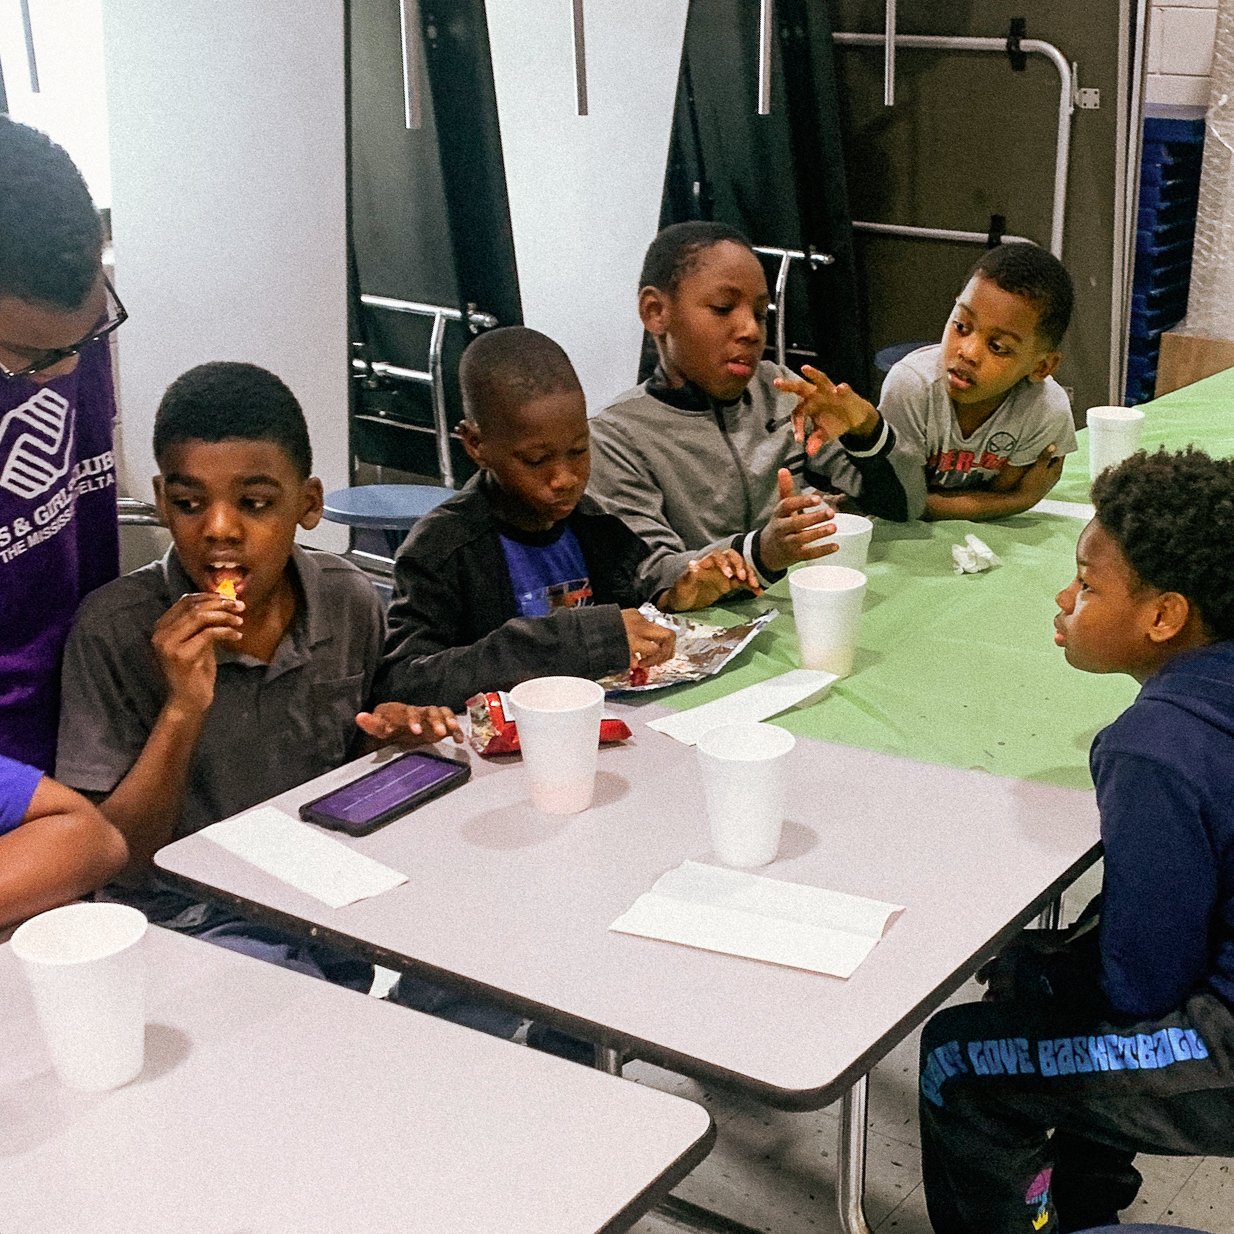 🍎 Snack time at Clarksdale Club! Fueling up for fun and learning. 😊 

For more information or to sign up, contact Alexandria Henderson, Unit Director: 📞 662-645-9230 📧 ahenderson@bgcmsdelta.org

#HealthyHabits #AfterSchoolFun #ClarksdaleClub